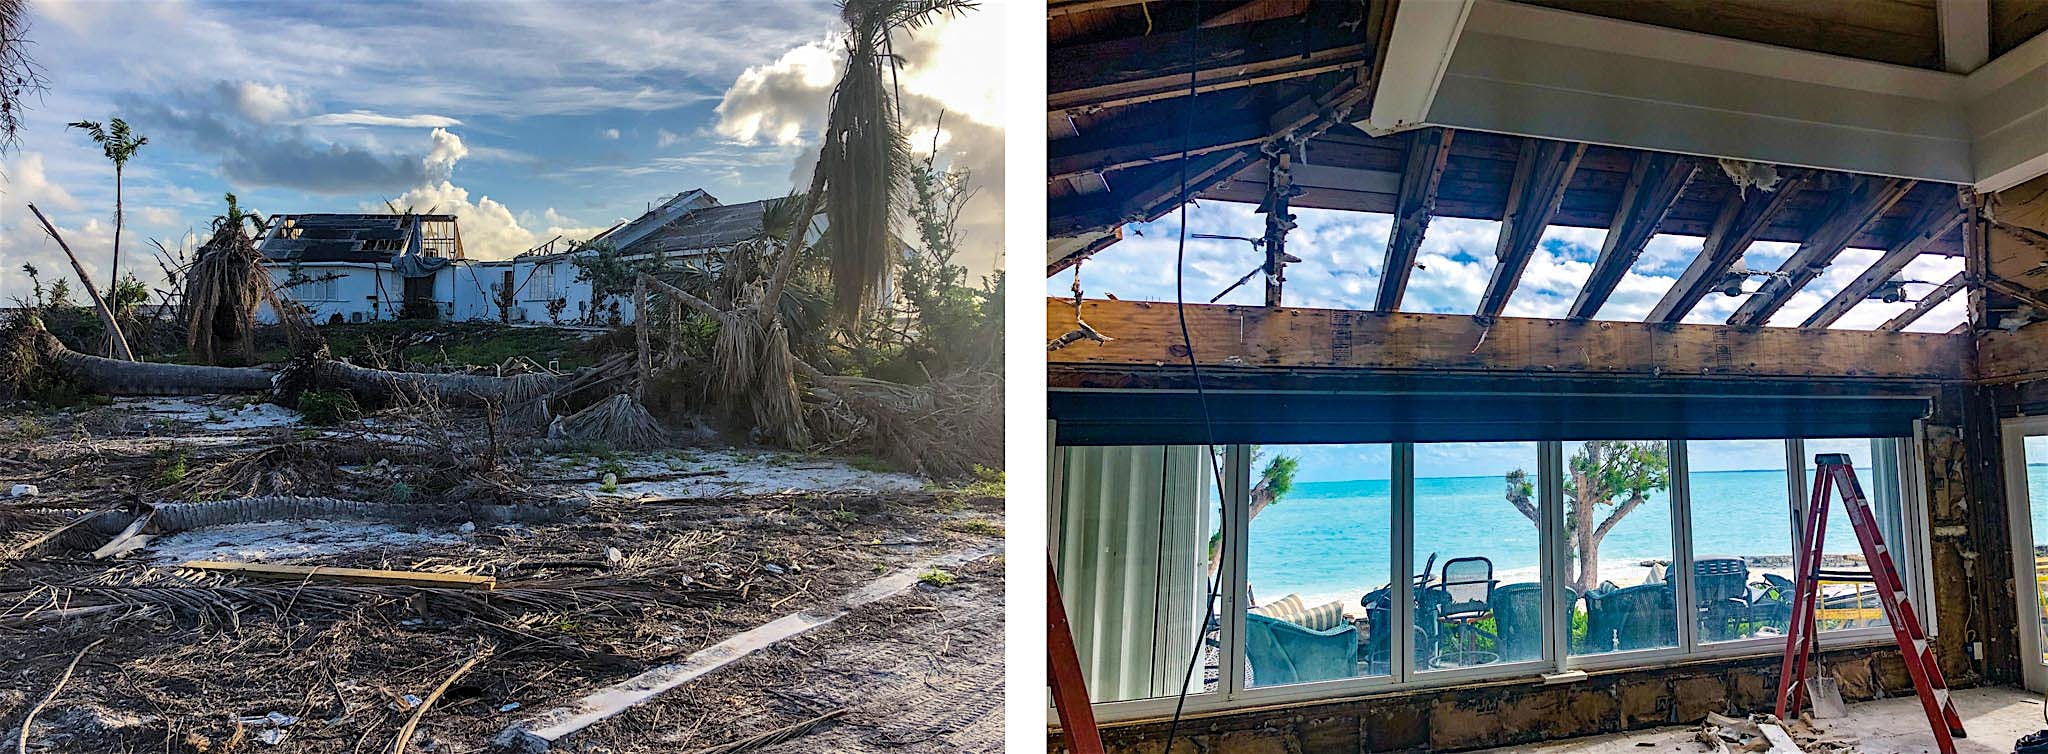 vacaation home destroyed by Hurricane Dorian with folding glass window wall intact